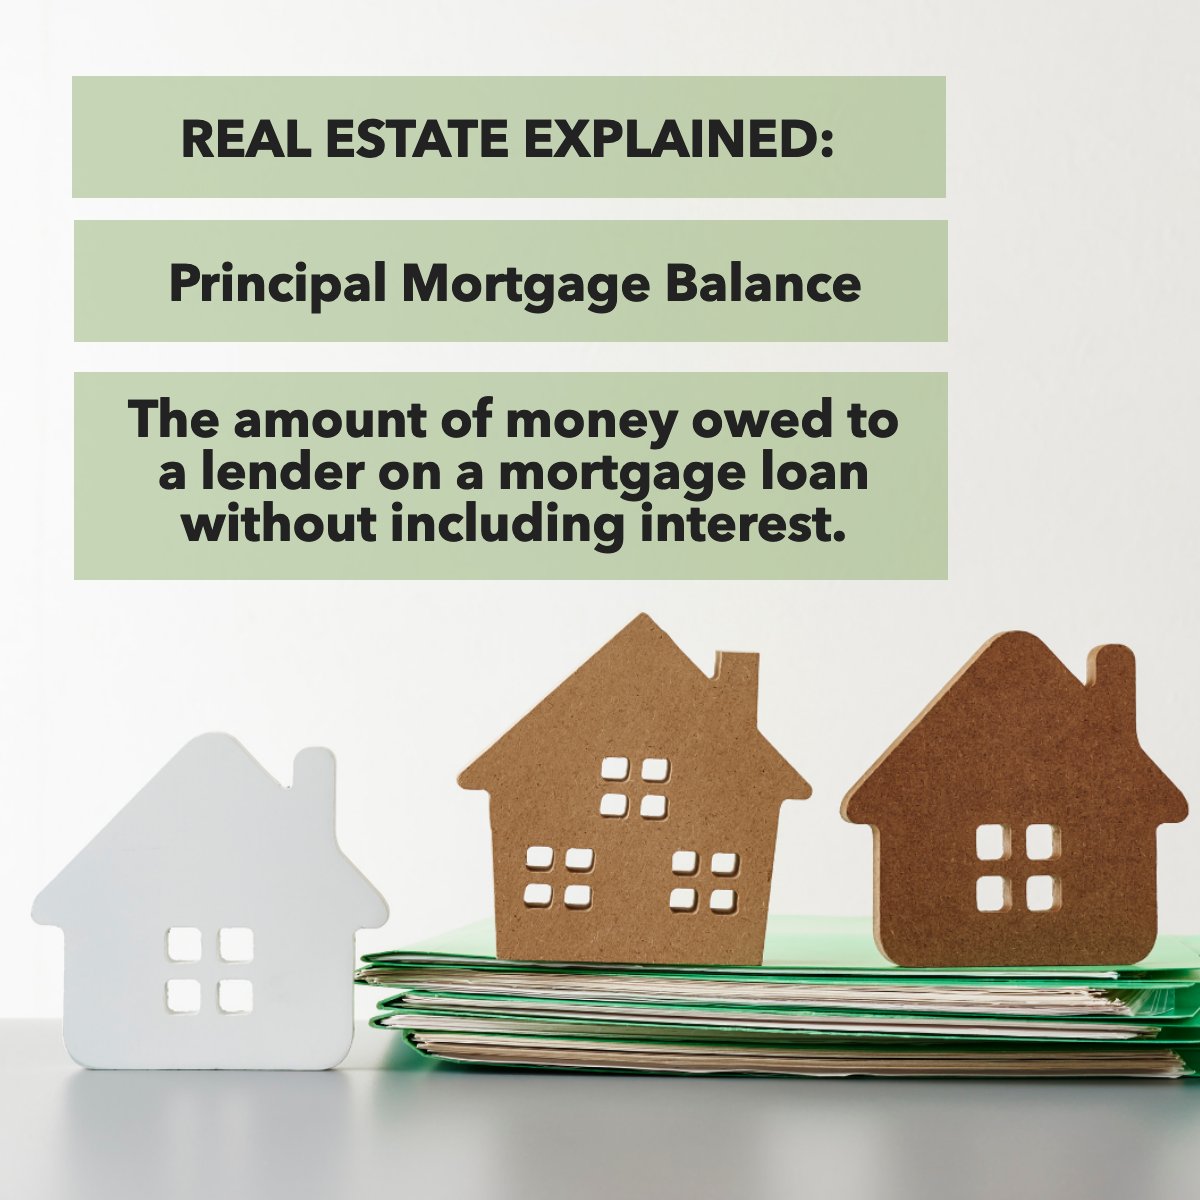 Real Estate Explained: Do you know what 'Principal Mortgage Balance' is? 🤓 #realestateadvice #mortgagepro #realestateeducation #realestate101 #doyouknow